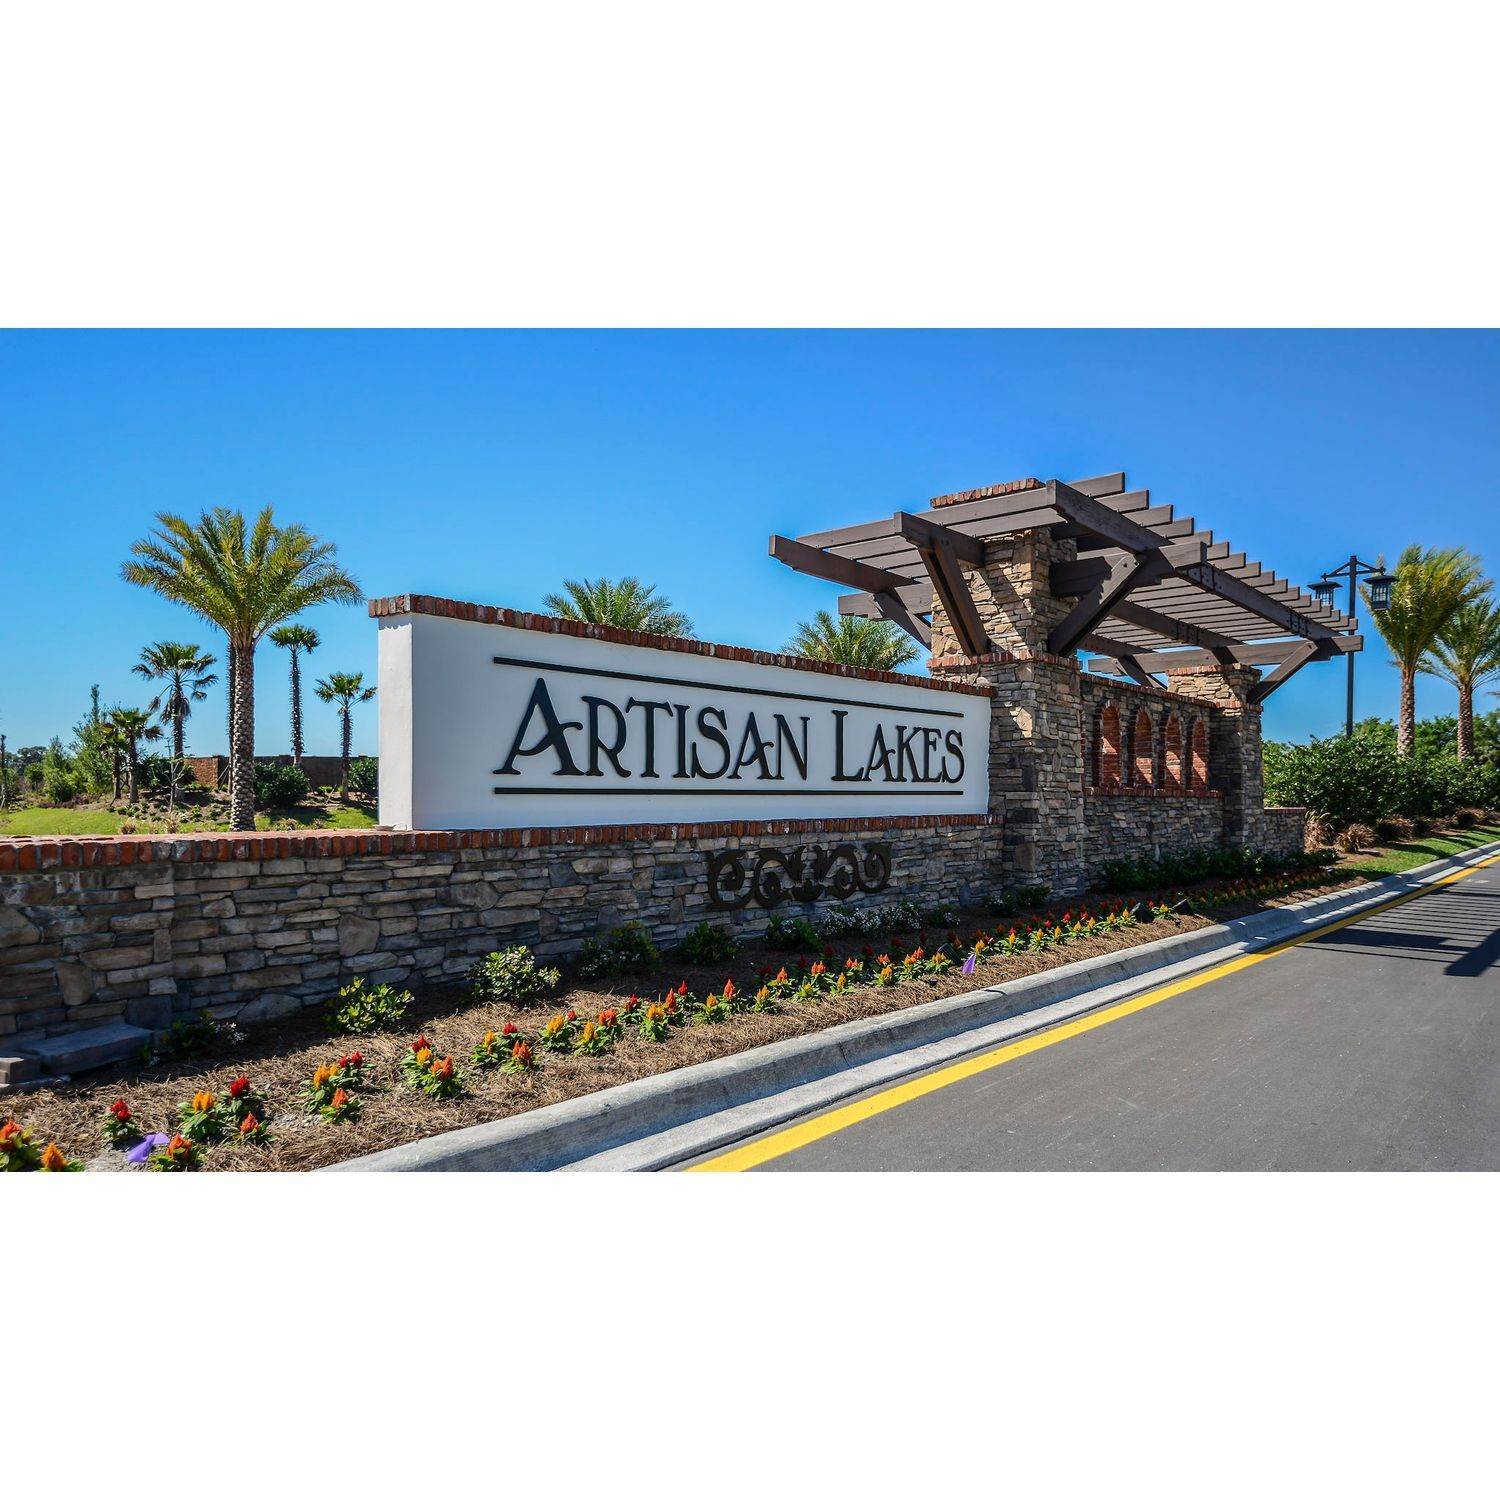 12. Eave's Bend at Artisan Lakes bâtiment à 5967 Maidenstone Way, Palmetto, FL 34221